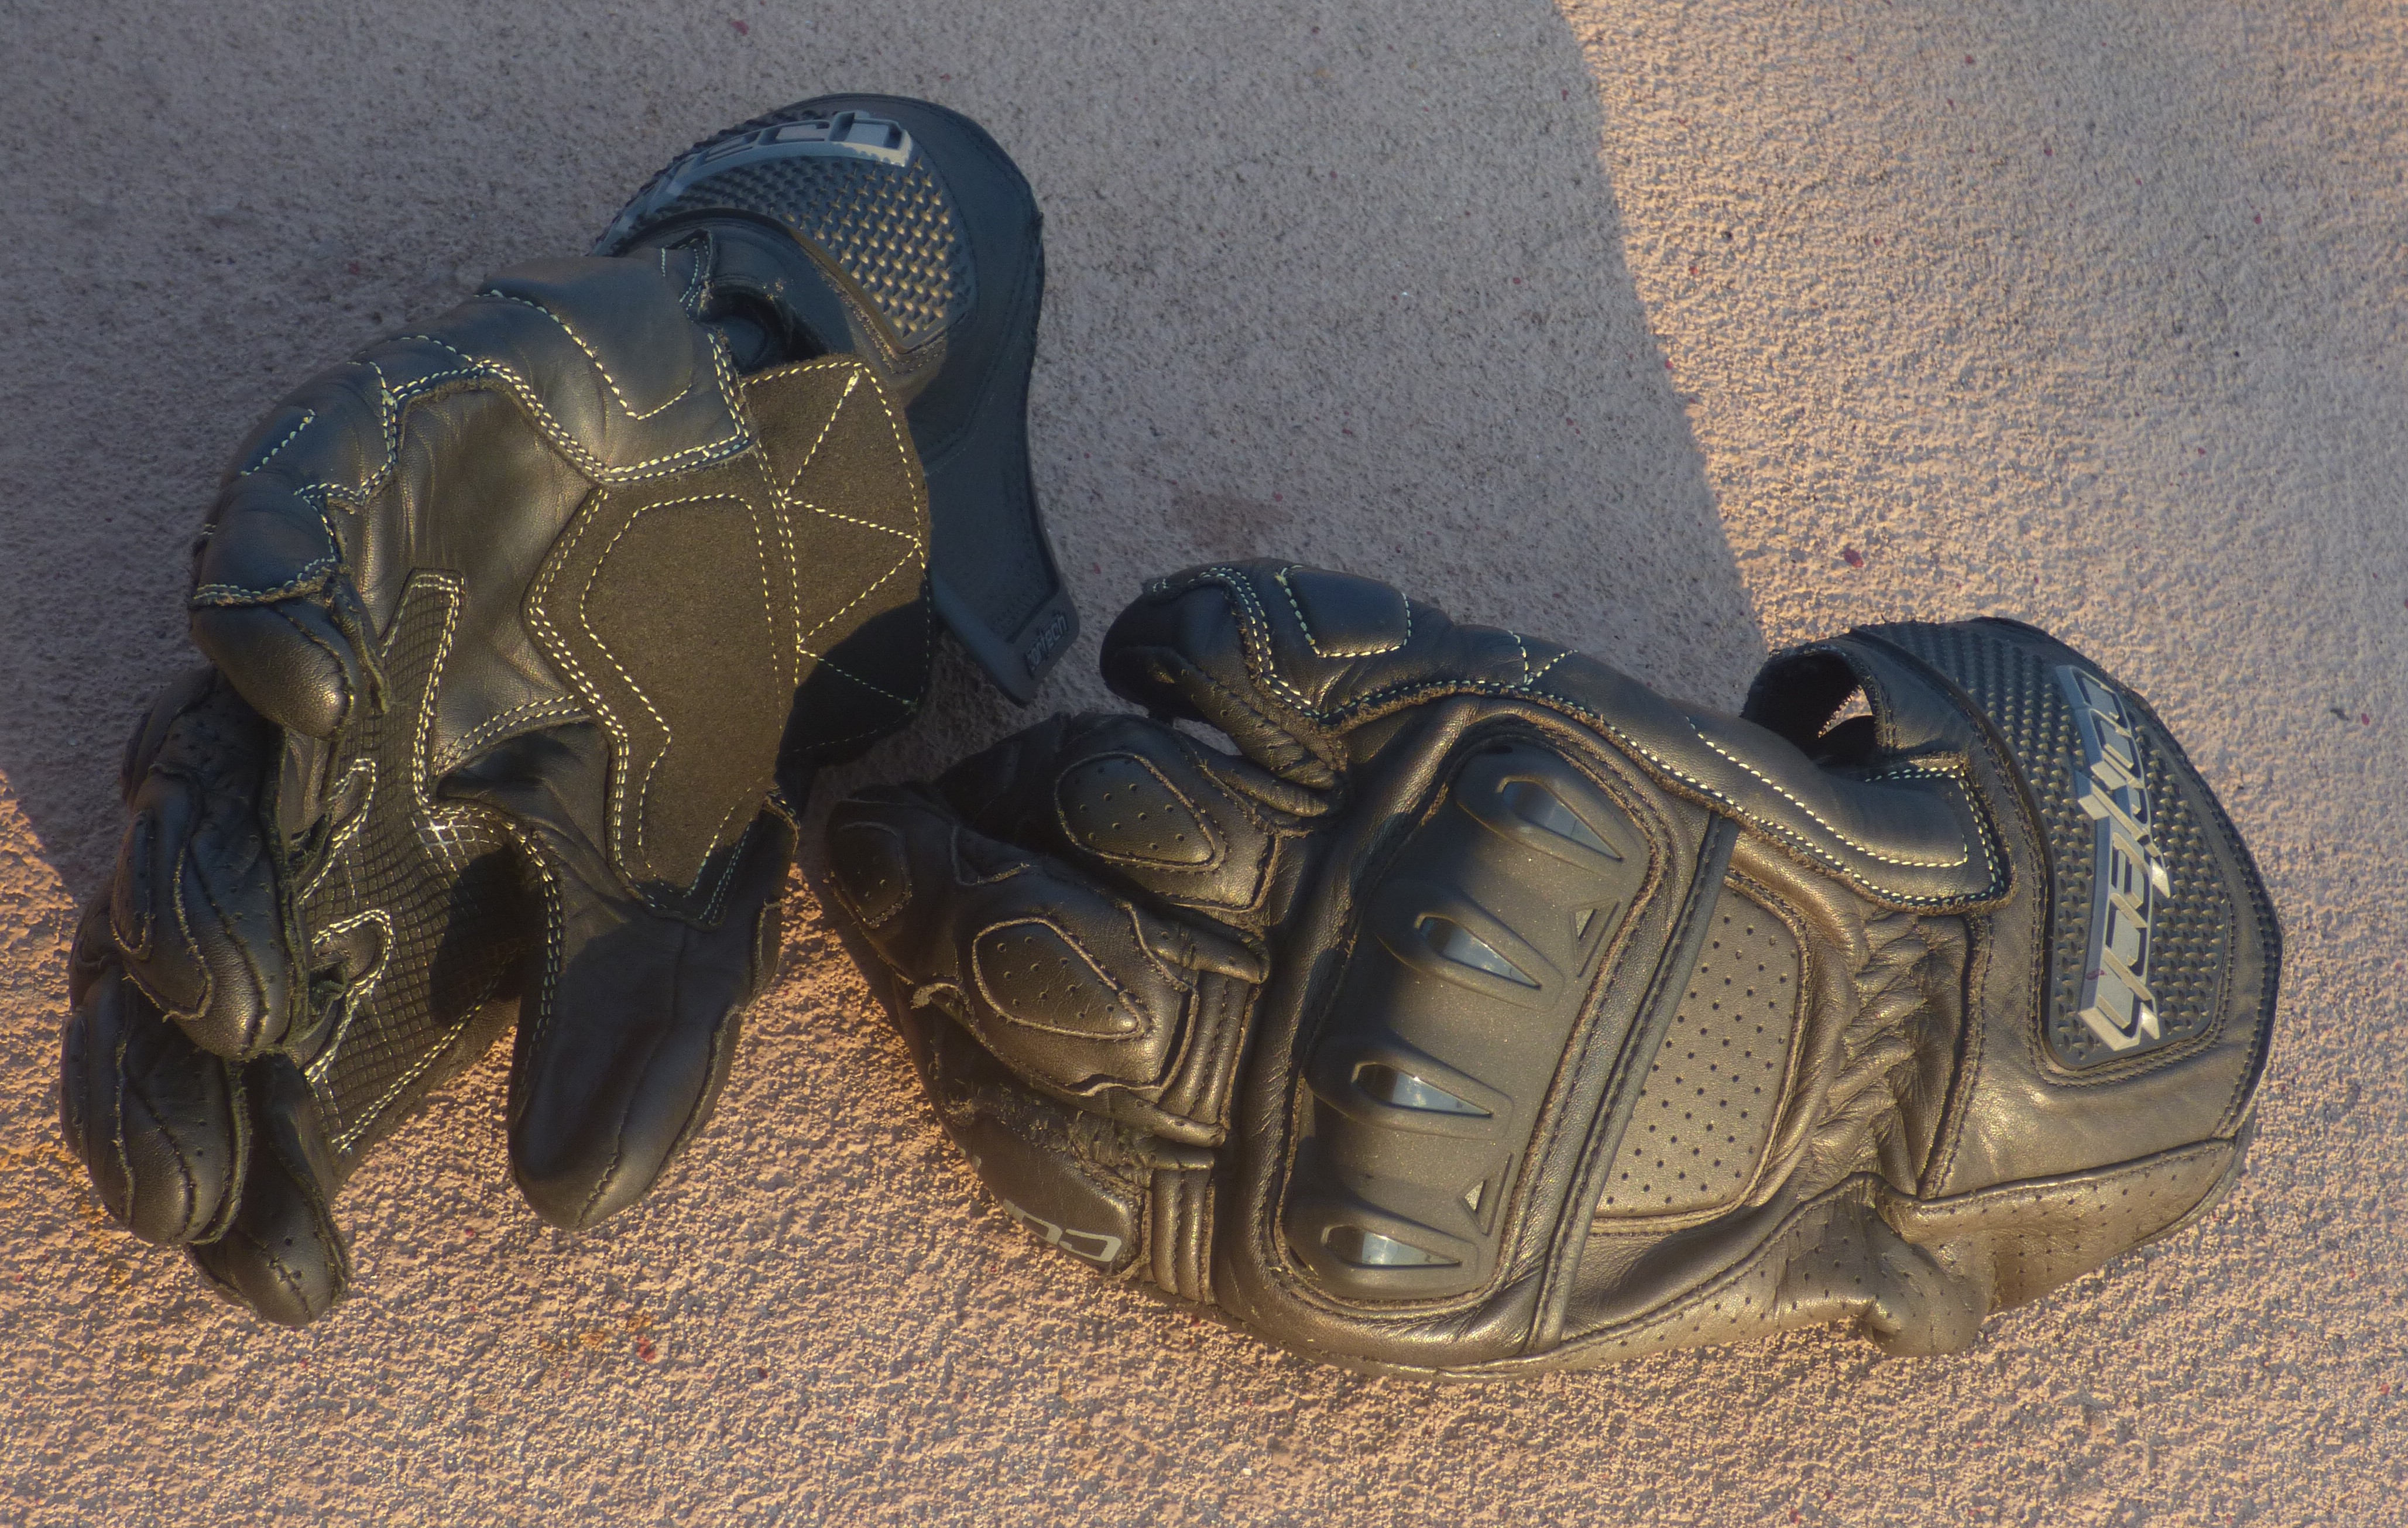 Cortech motorcycle gloves